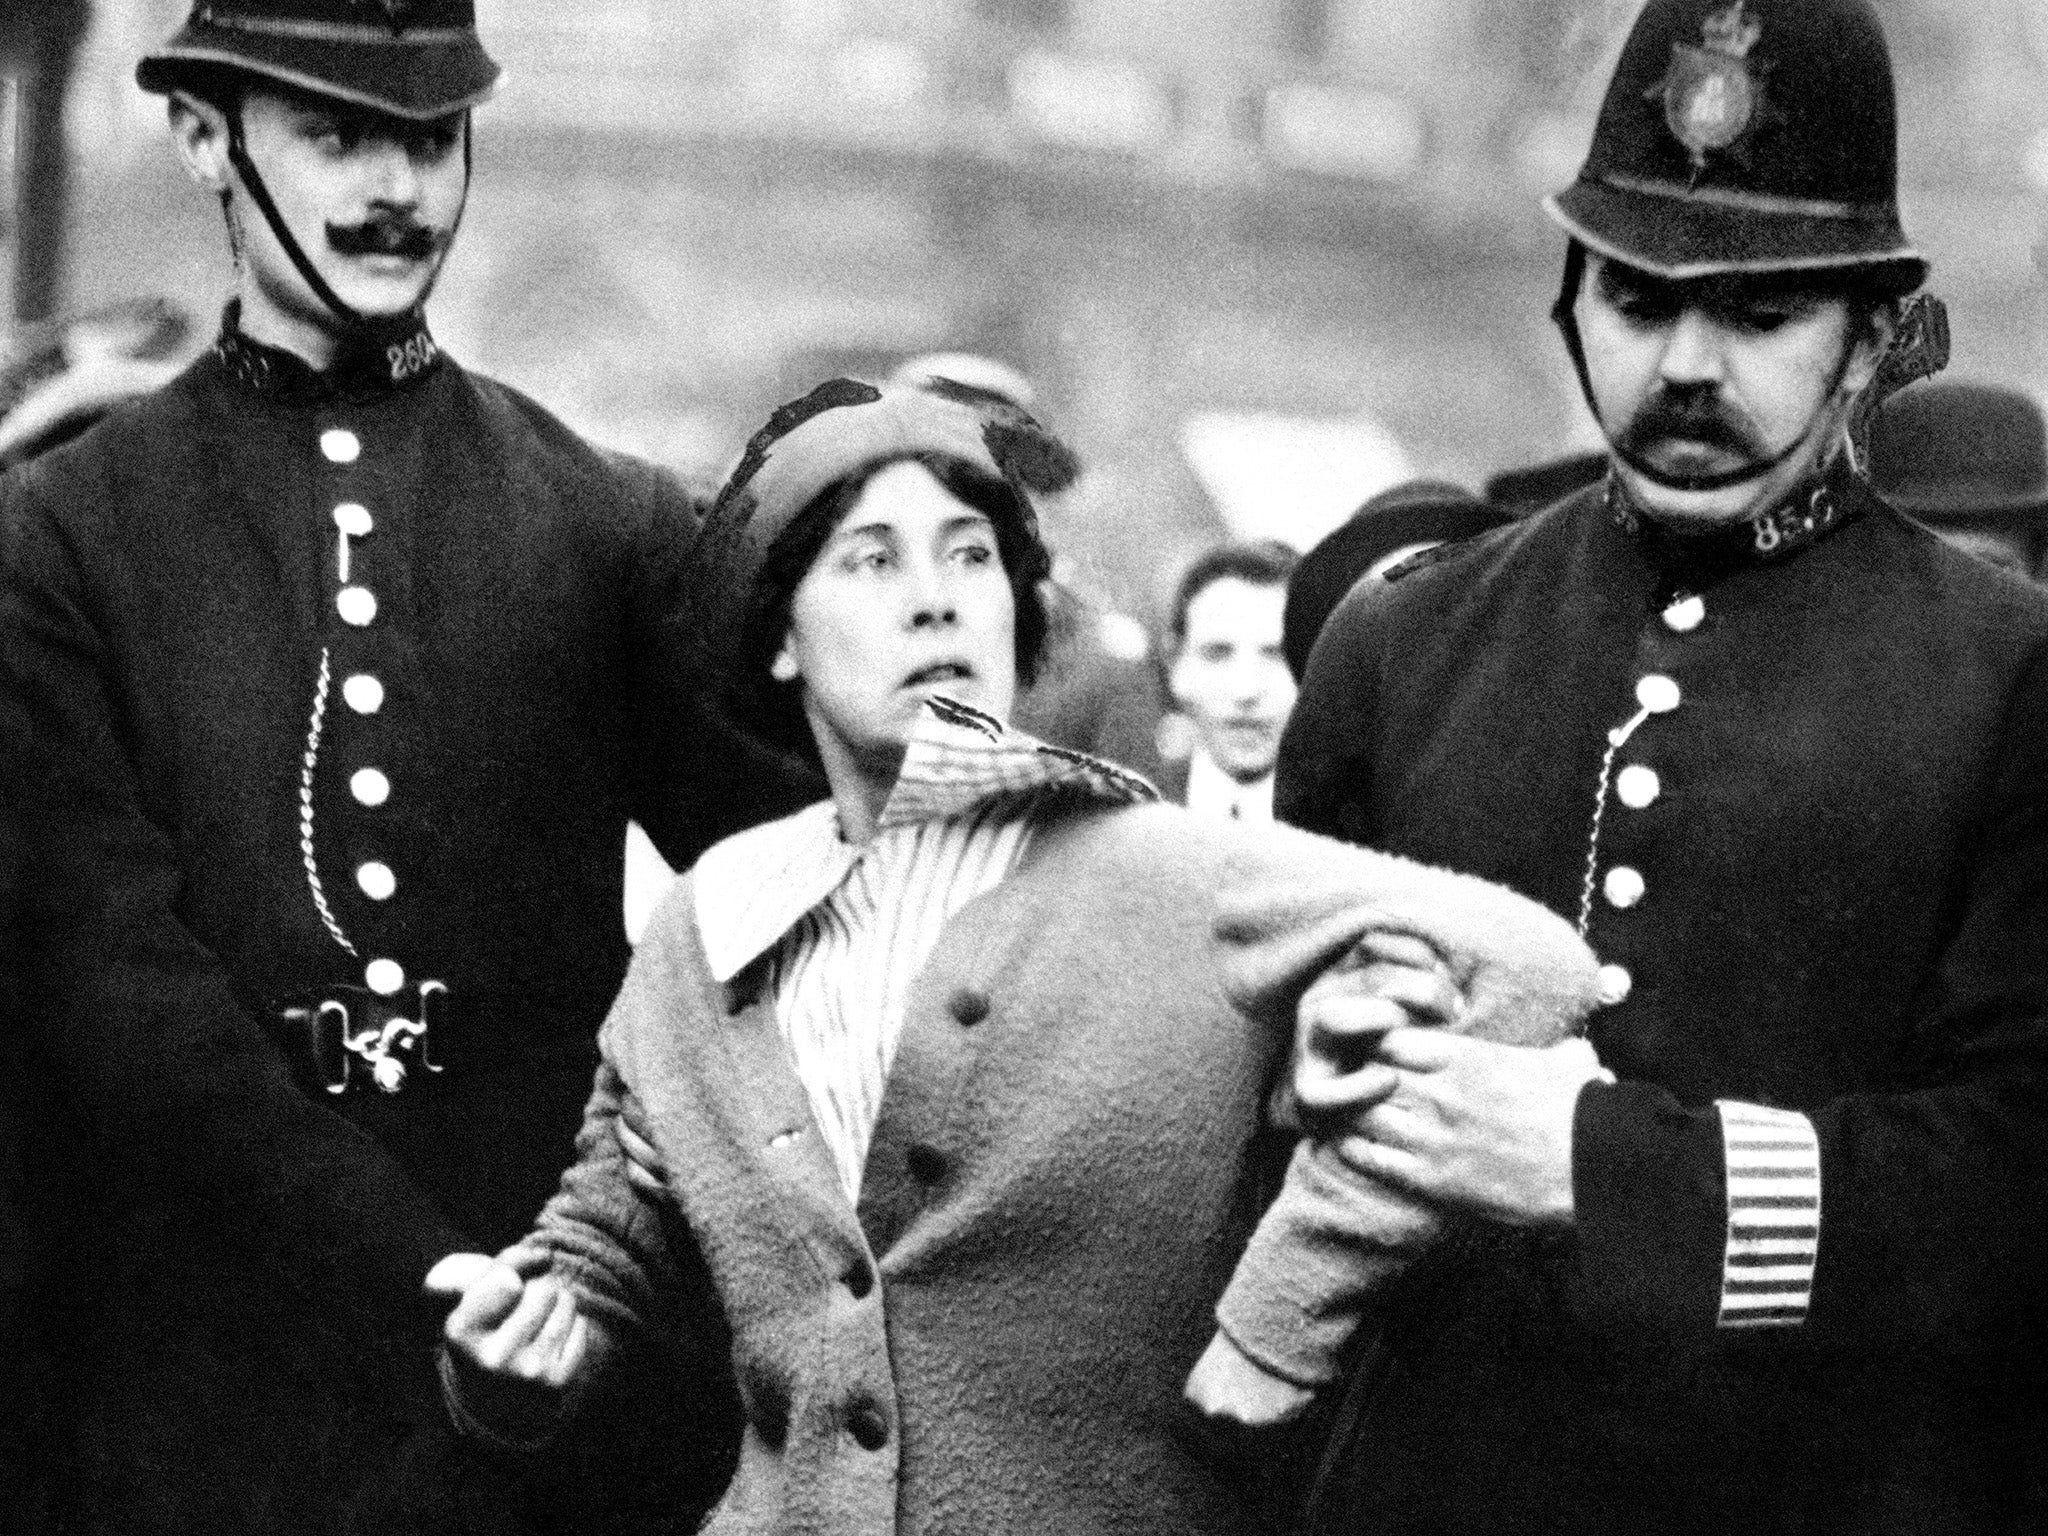 File photo from 1914 of a suffragette being arrested by police officers. The Representation of the People Act, passed on February 6 1918, gave certain women over the age of 30 a vote and the right to stand for Parliament